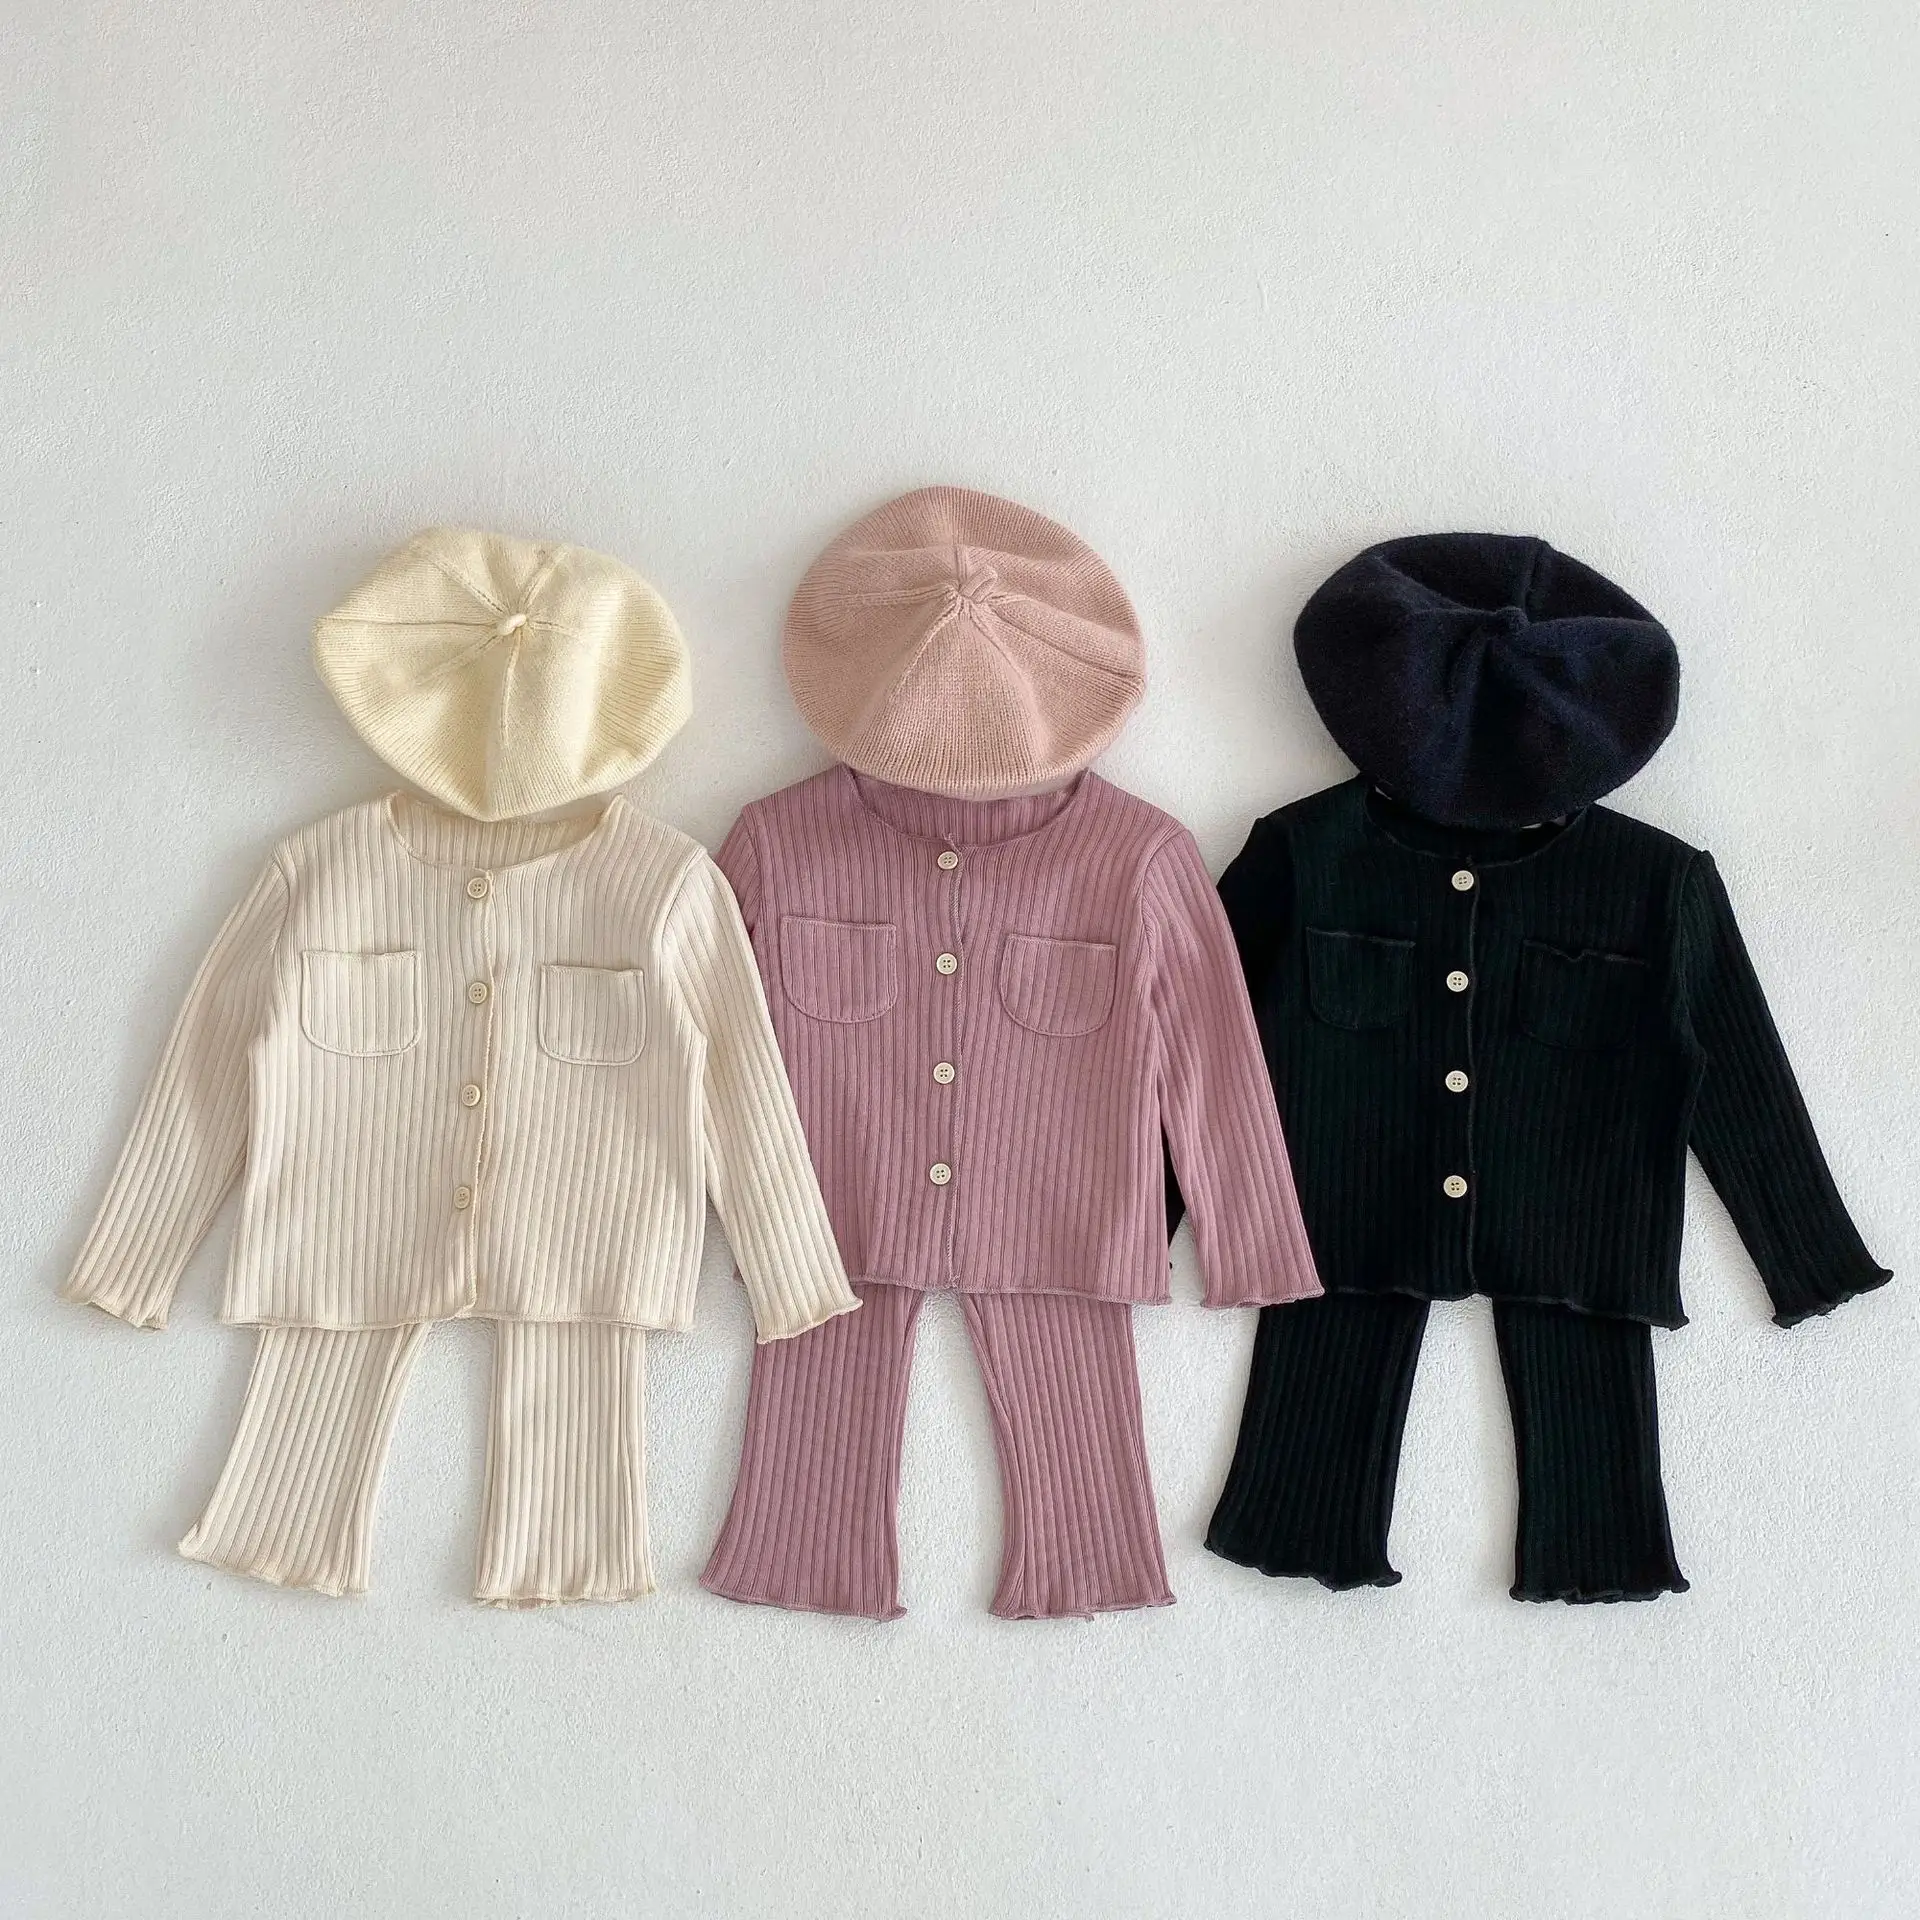 Baby Clothing Spring And Autumn New Style Girls' Knitting Coat Pocket Top Pants Two Piece Boy Apricot Knitted Suit 0-3 Years Old